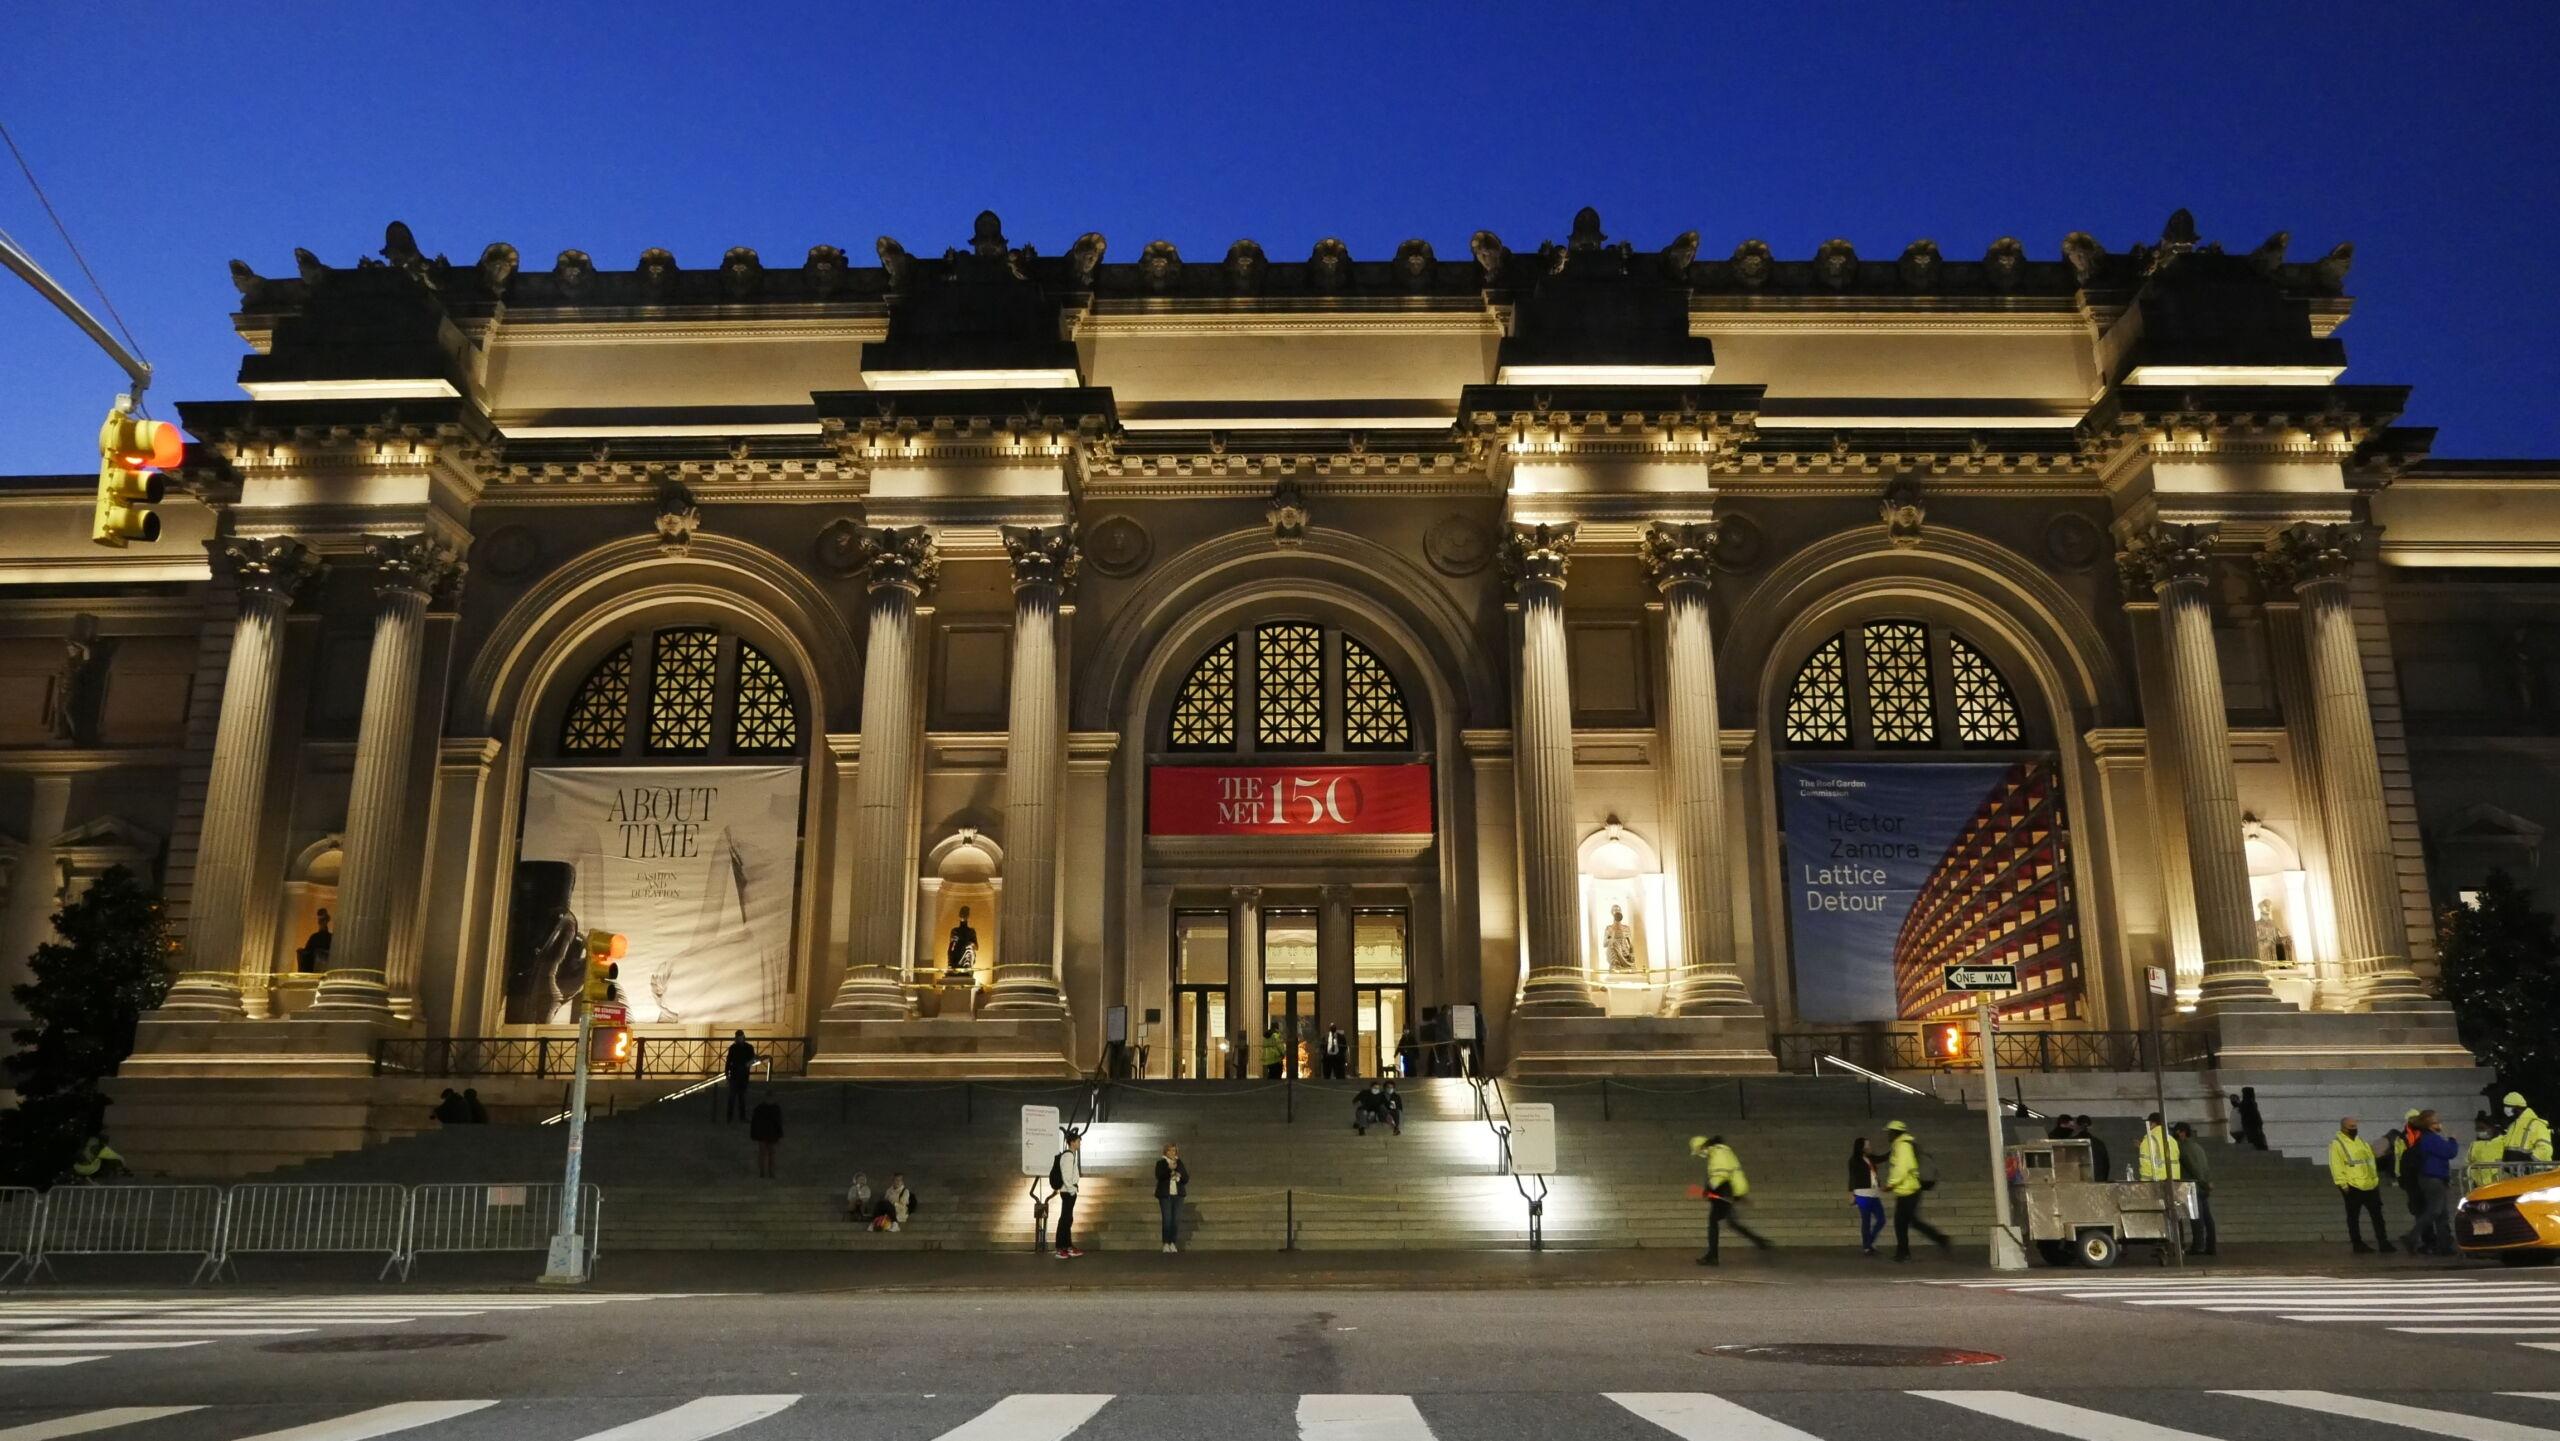 The Met Museum, New York, as the Wangechi Mutu's sculptures are installed. 